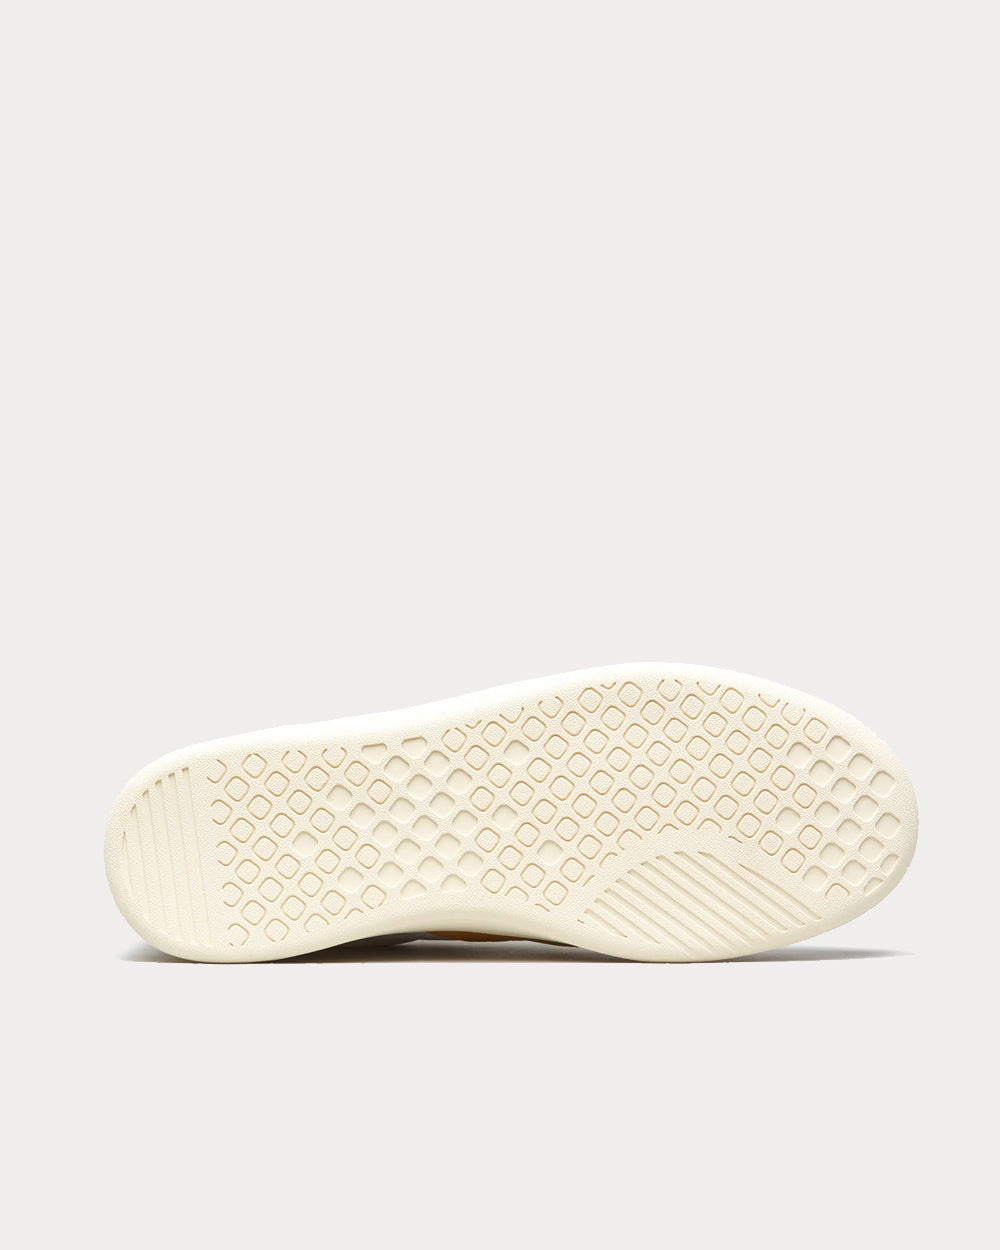 Everlane - Court Off-White / Fog Low Top Sneakers